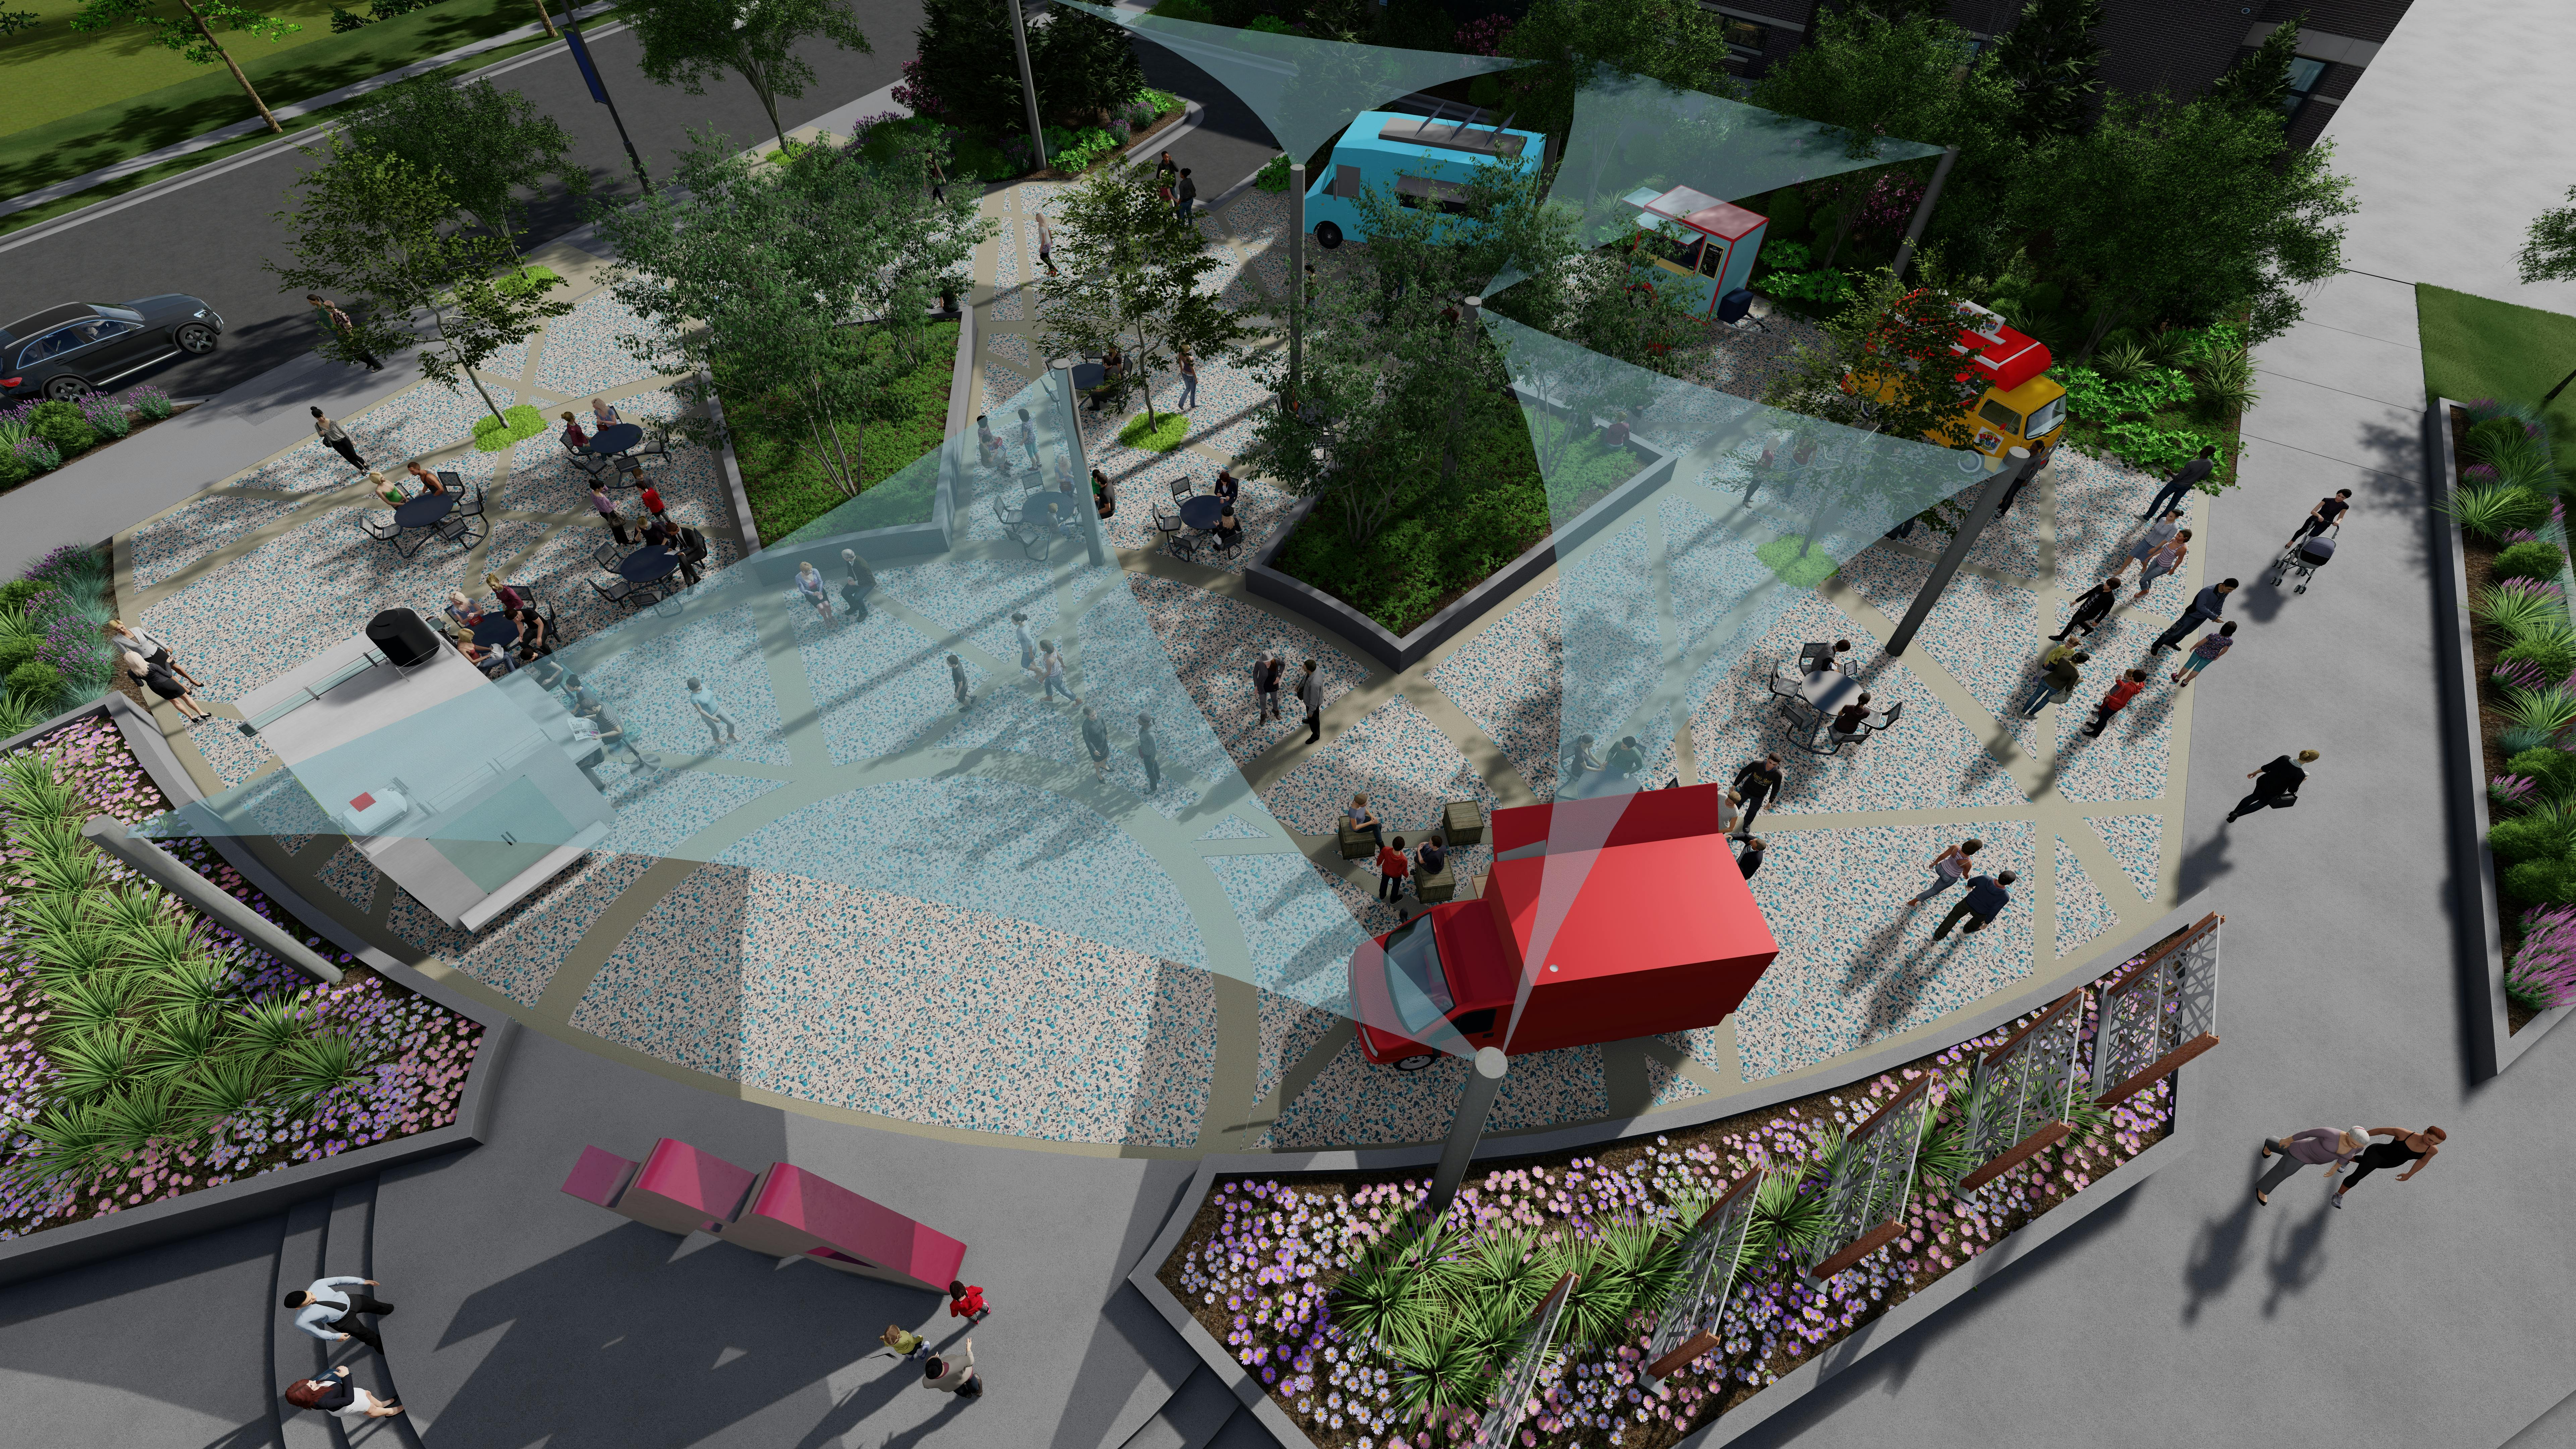 Overhead shot of Food Truck Plaza with Shade Awnings